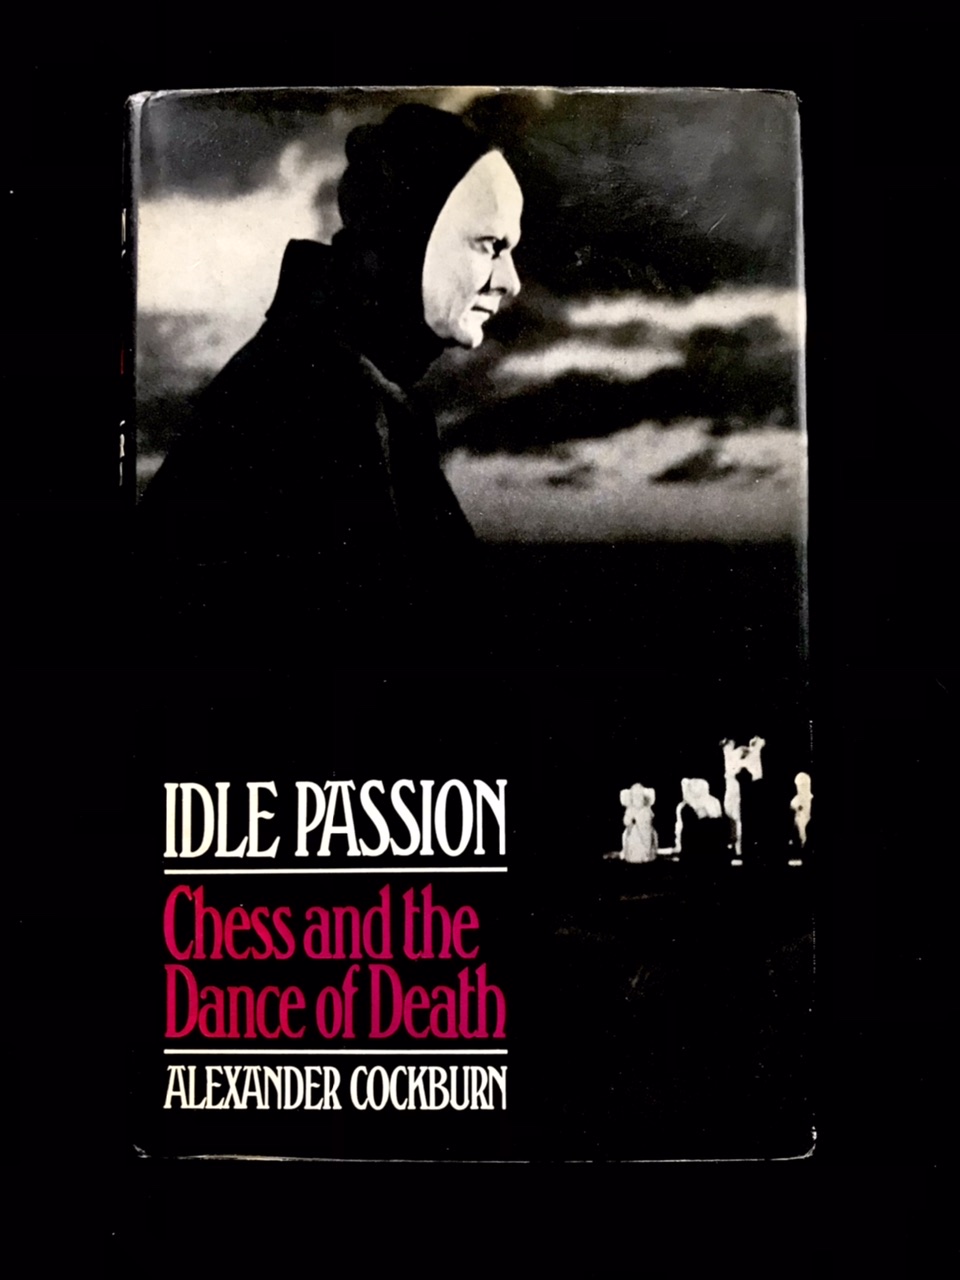 Idle Passion: Chess & The Dance Of Death by Alexander Cockburn